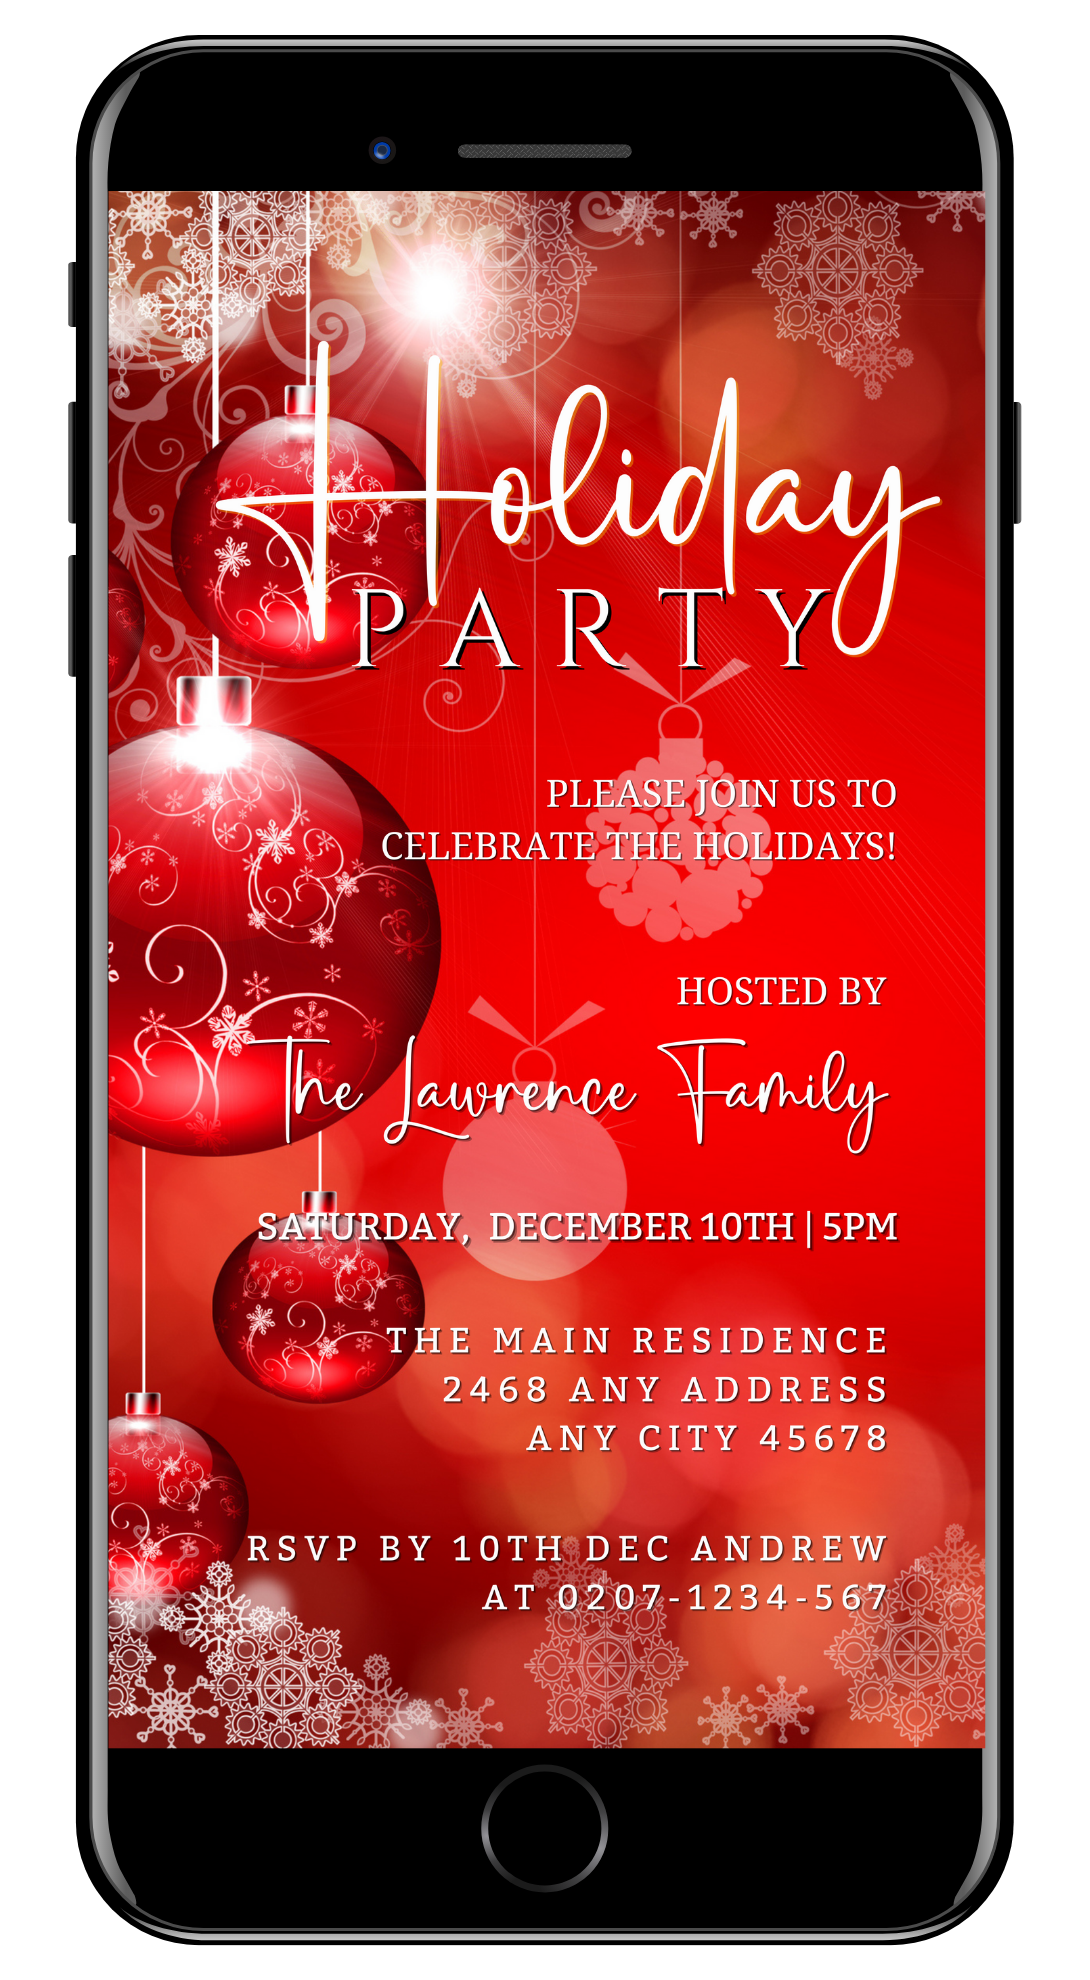 Editable digital holiday party invitation displayed on a smartphone screen, featuring glowing red and white ornaments from URCordiallyInvited.